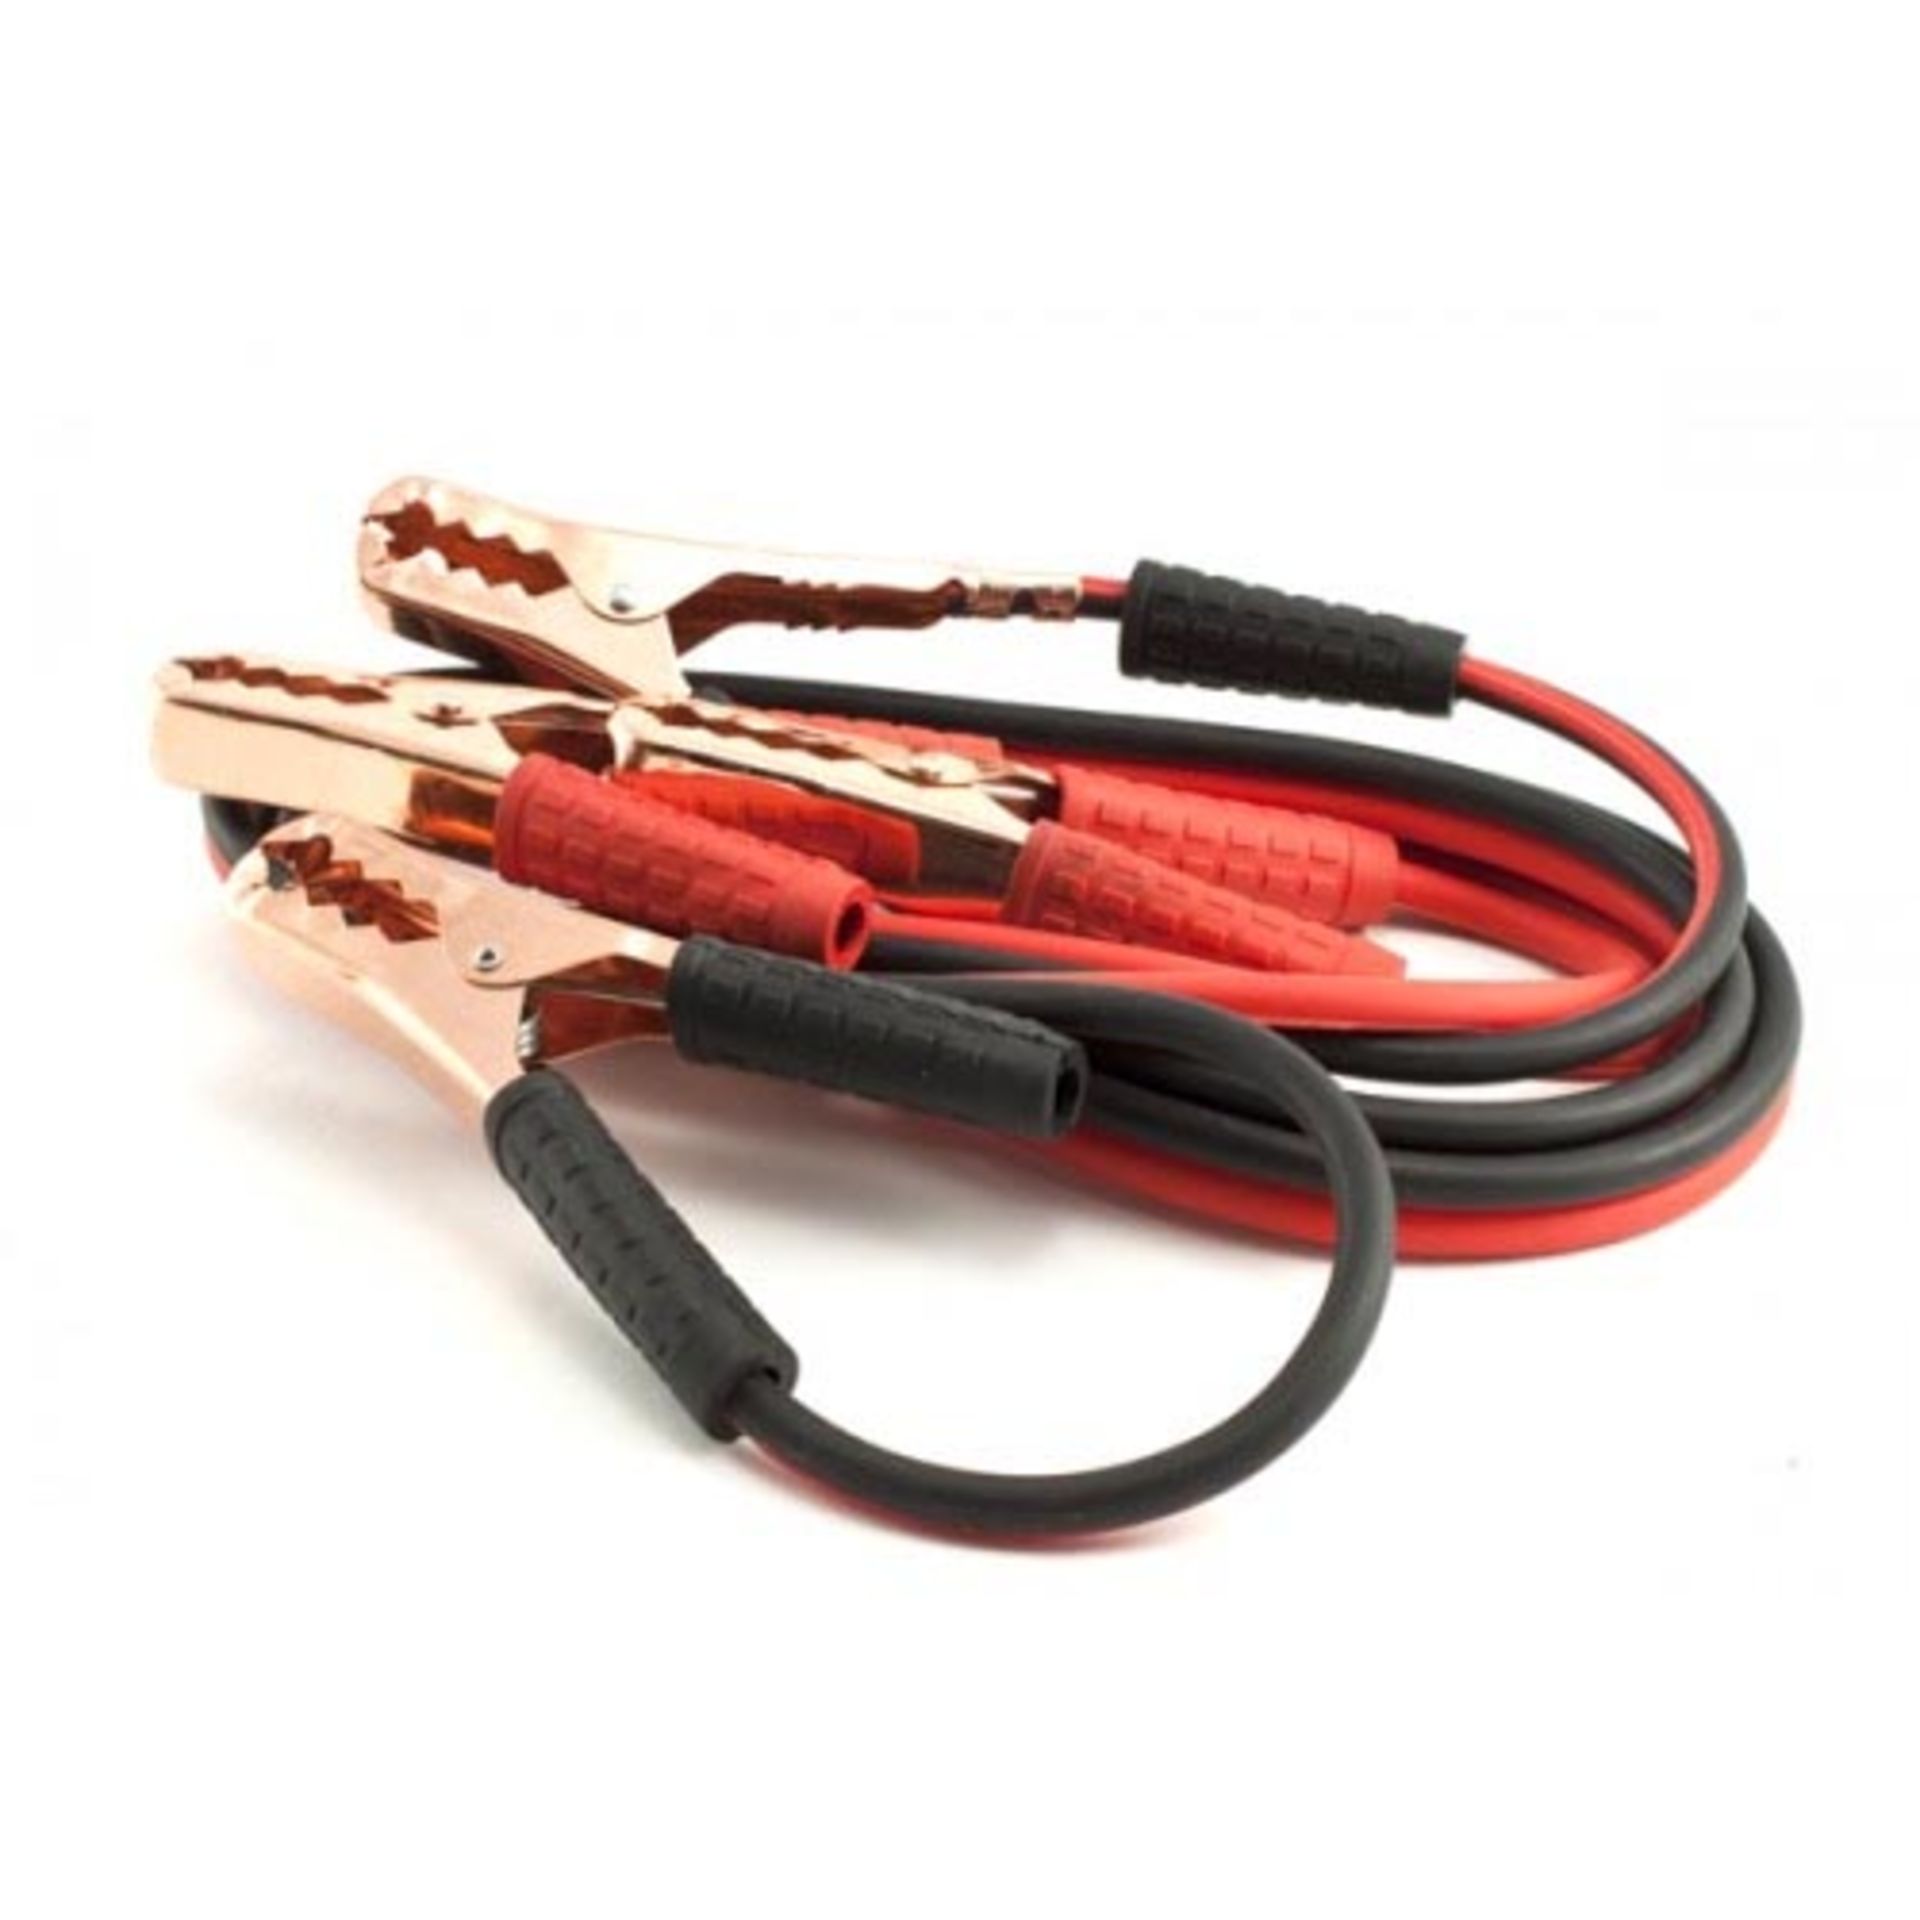 V *TRADE QTY* Brand New 200AMP Booster Cables X 30 YOUR BID PRICE TO BE MULTIPLIED BY THIRTY